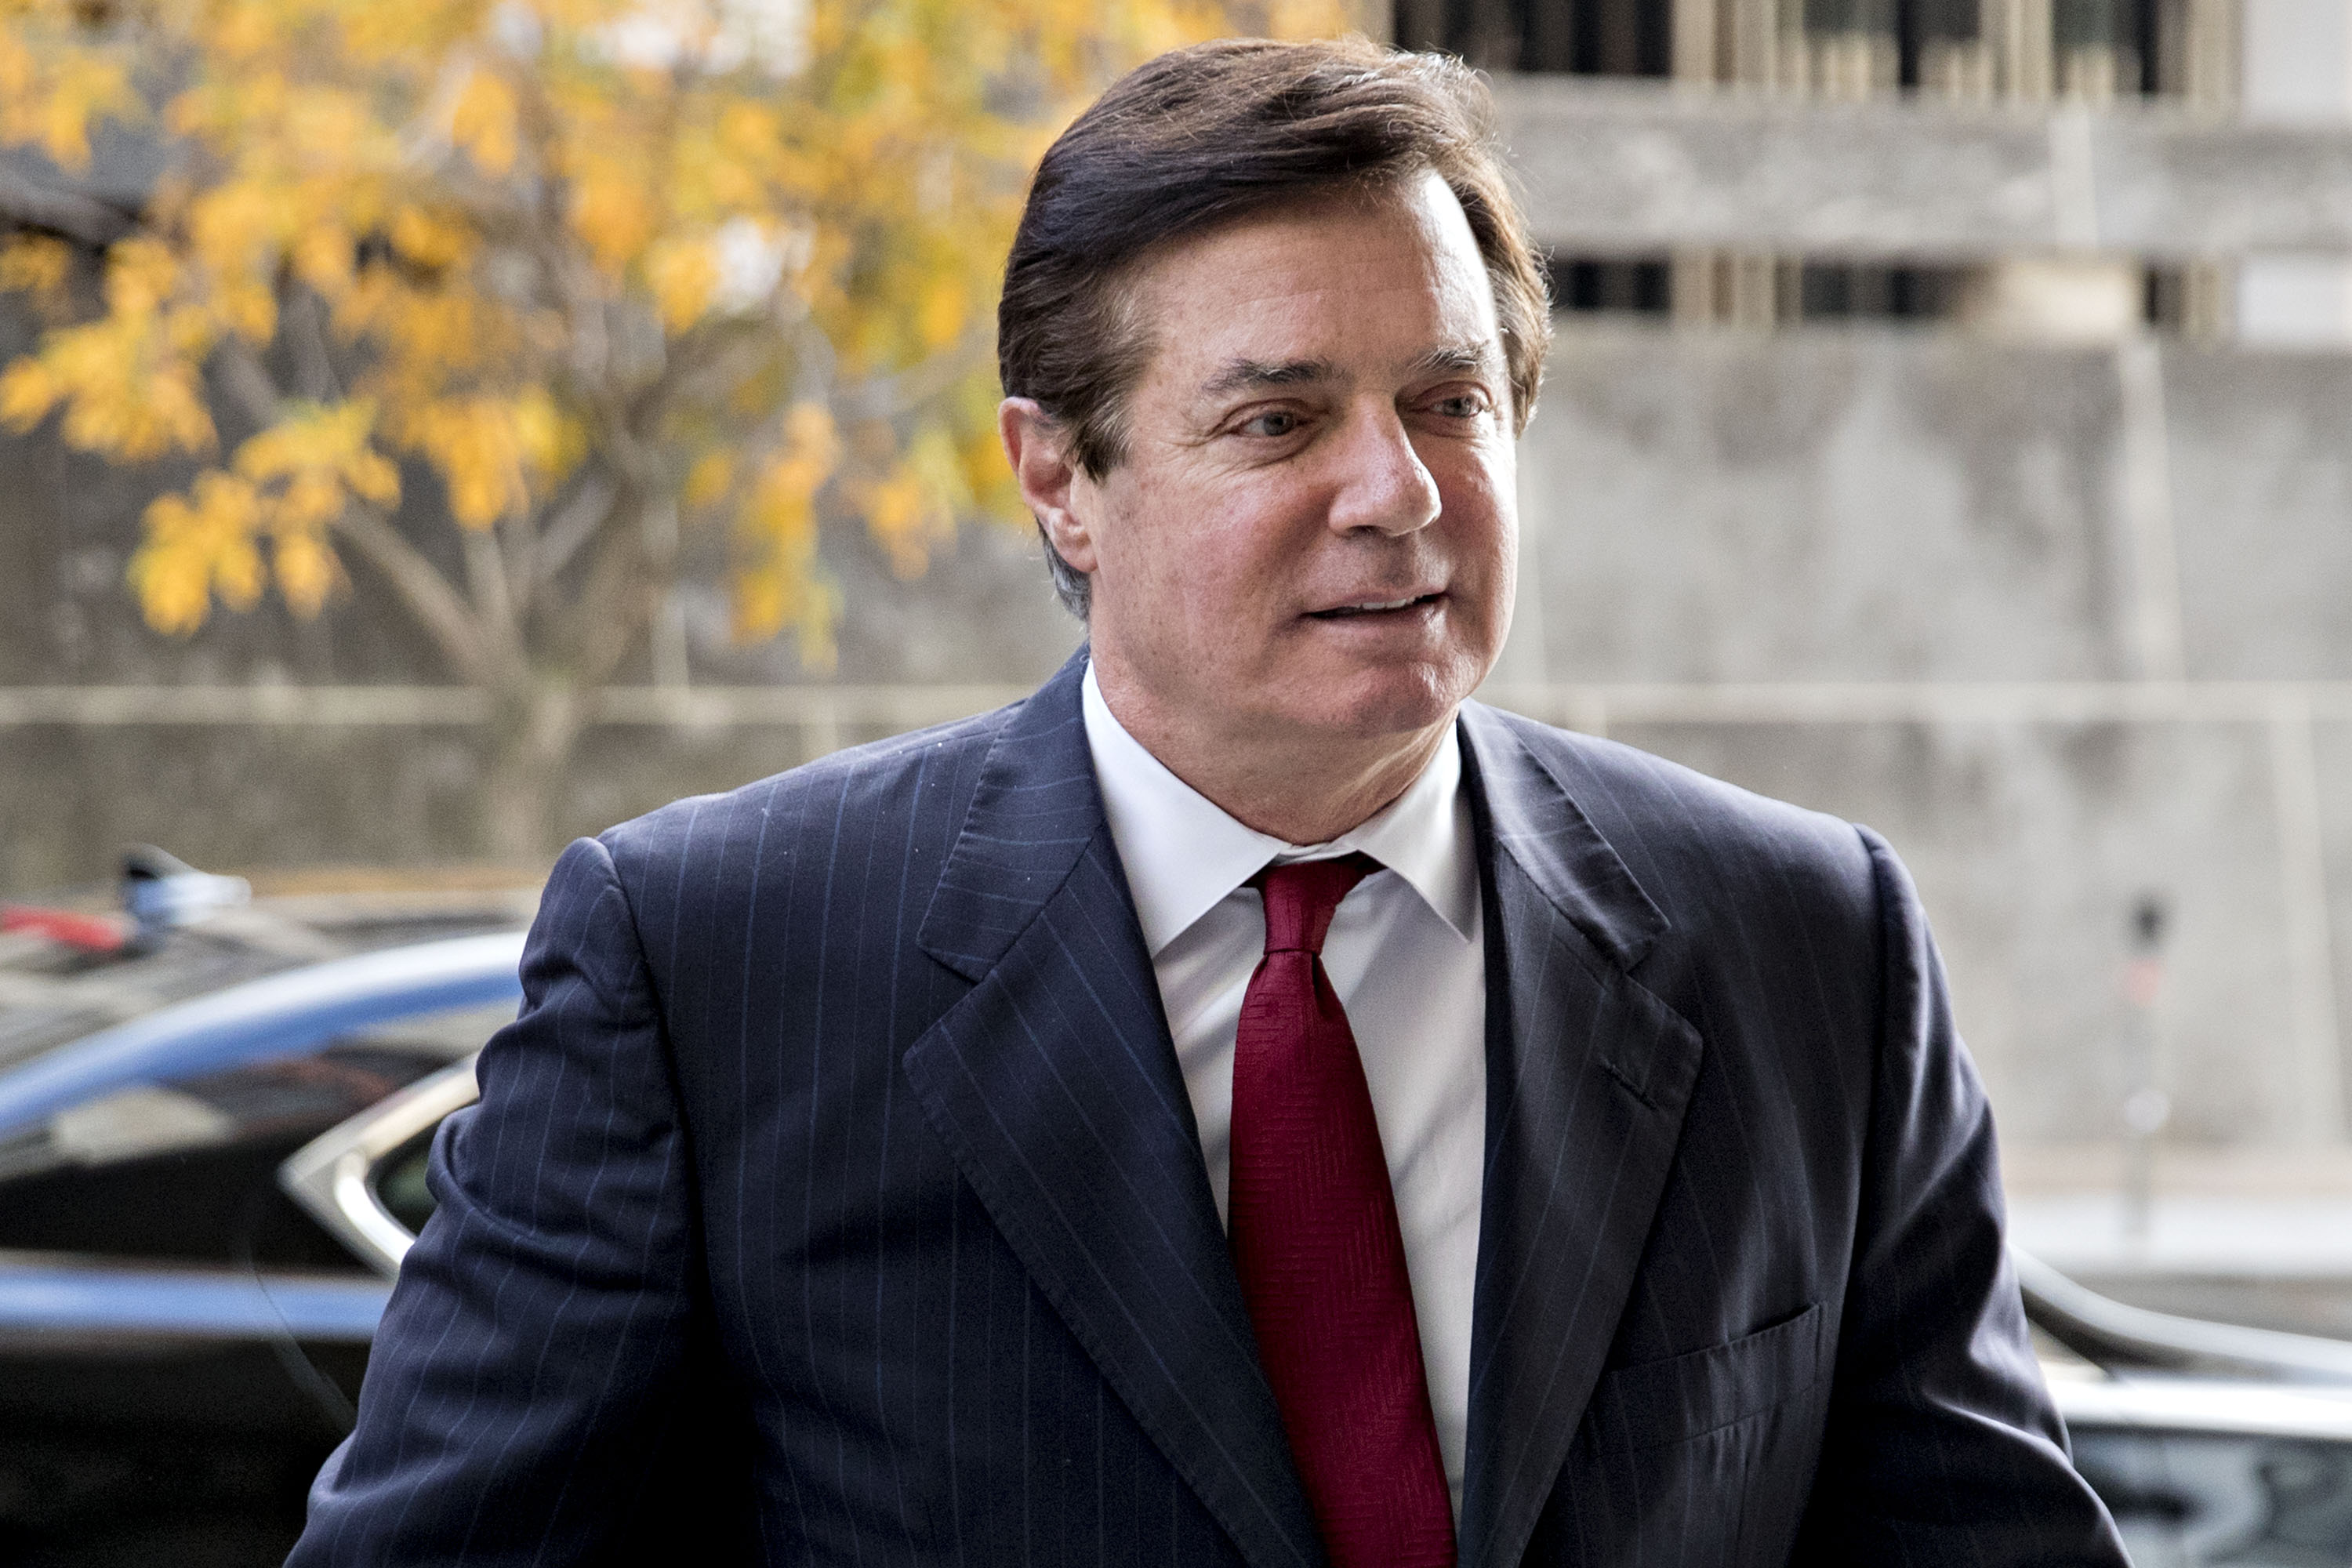 Paul Manafort, former campaign manager for Donald Trump, arrives to the U.S. Courthouse for a bond hearing in Washington, D.C., U.S., on Monday, Nov. 6, 2017 (Andrew Harrer&mdash;Bloomberg /Getty Images)